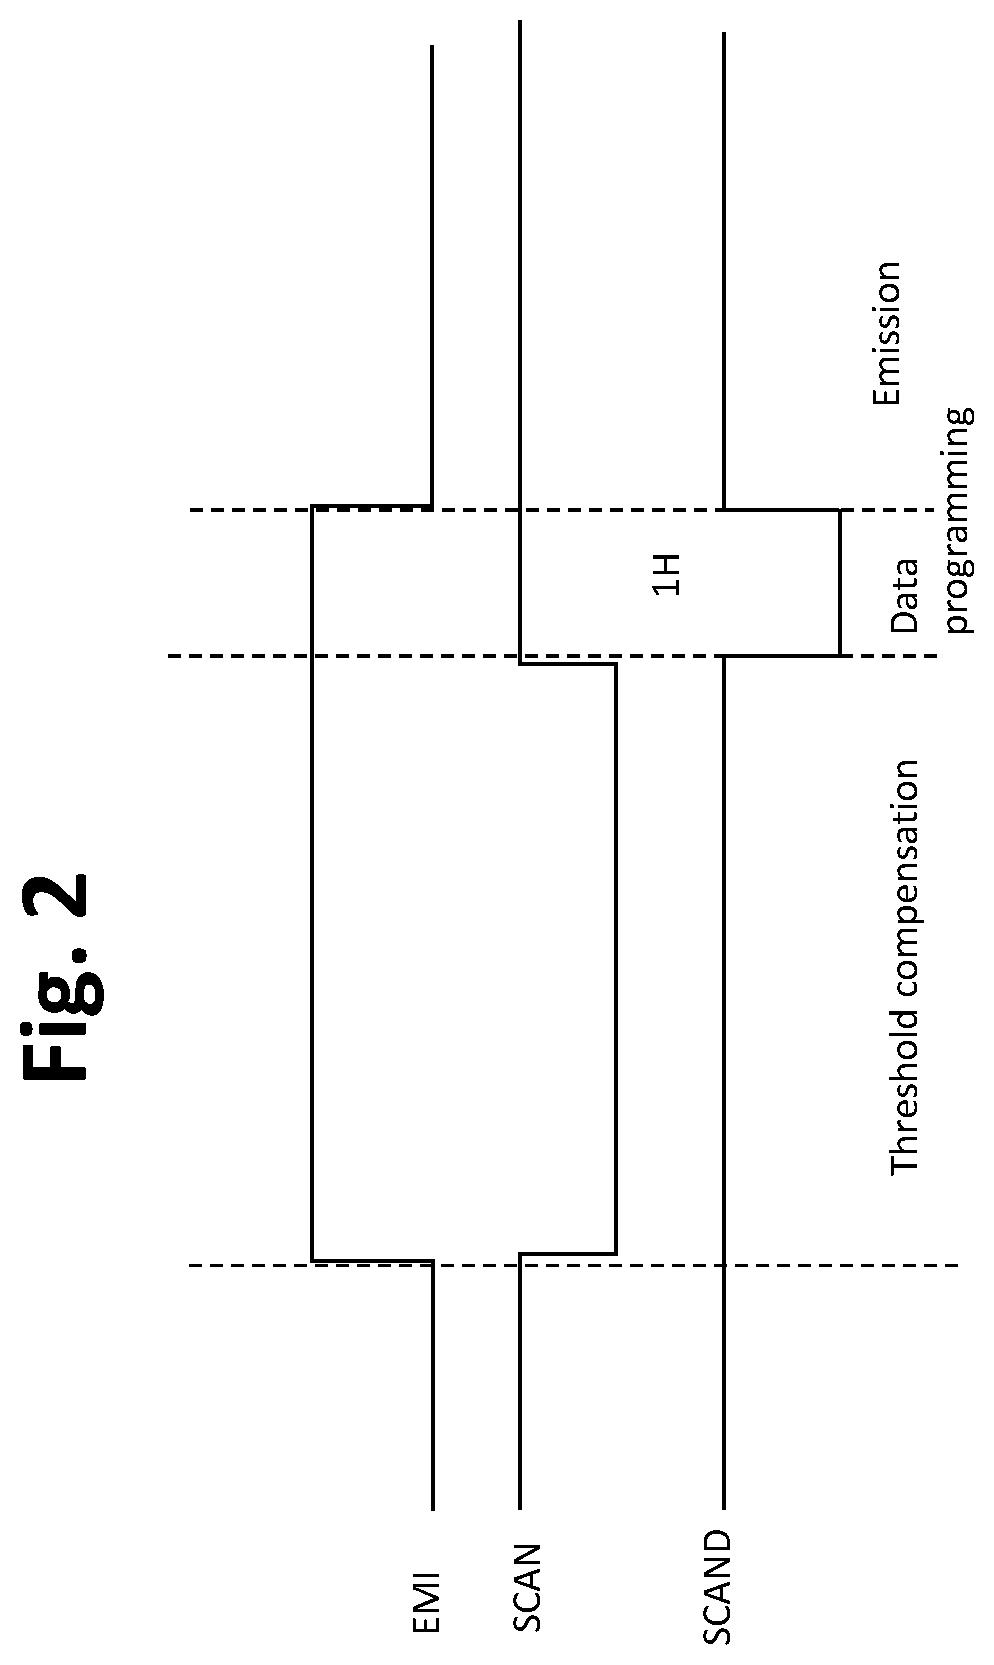 TFT pixel threshold voltage compensation circuit with short data programming time